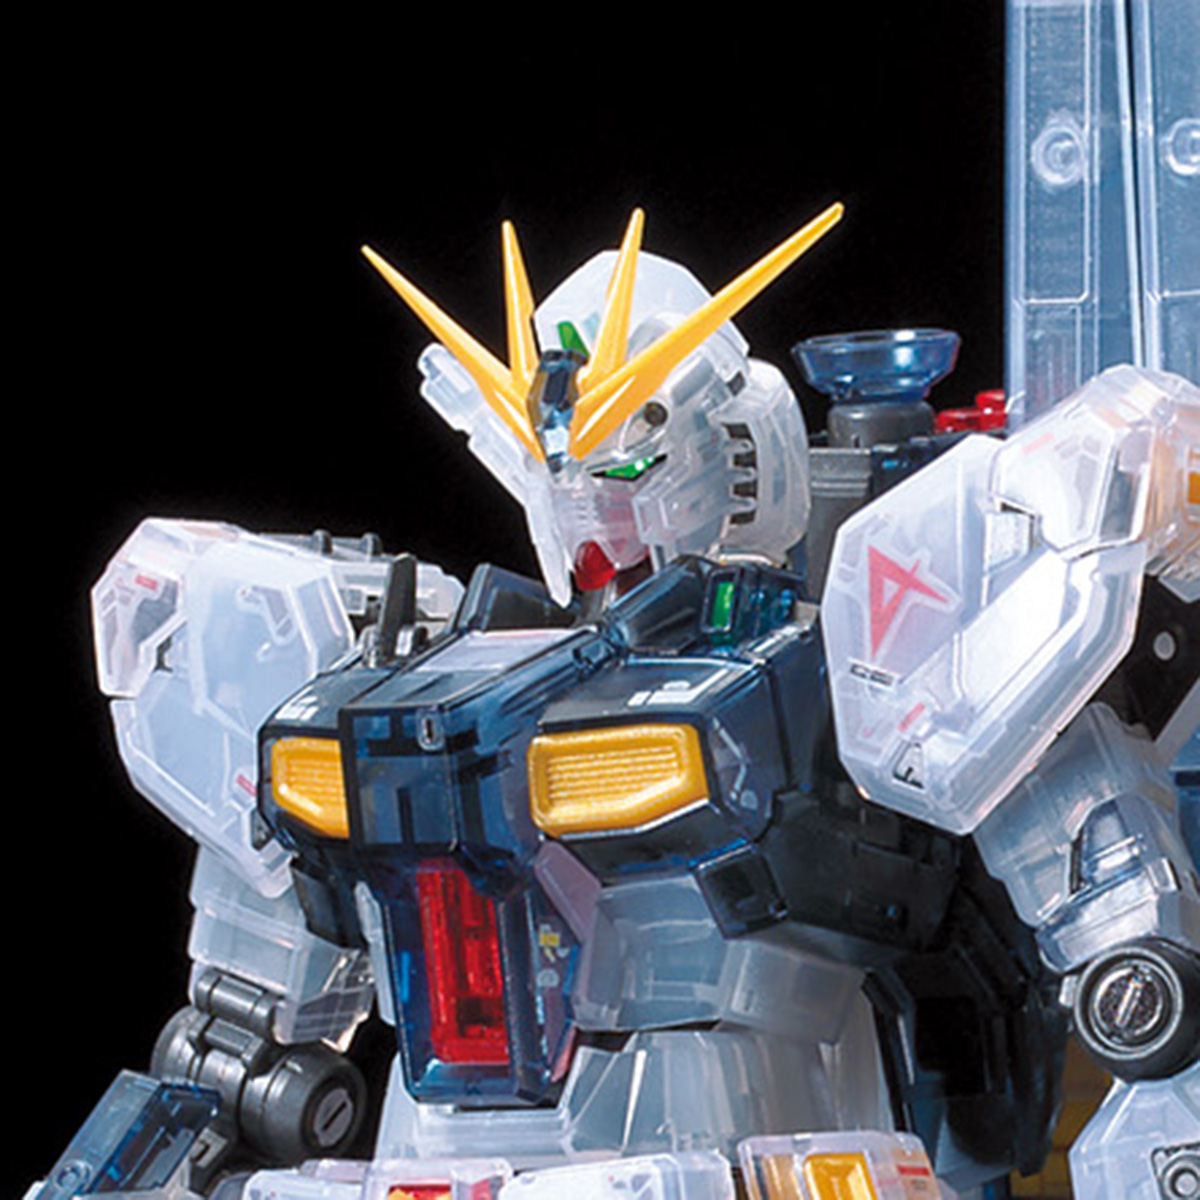 Rg 1 144 Ngundam Clear Color Limited Package Sep Delivery Gundam Premium Bandai Usa Online Store For Action Figures Model Kits Toys And More